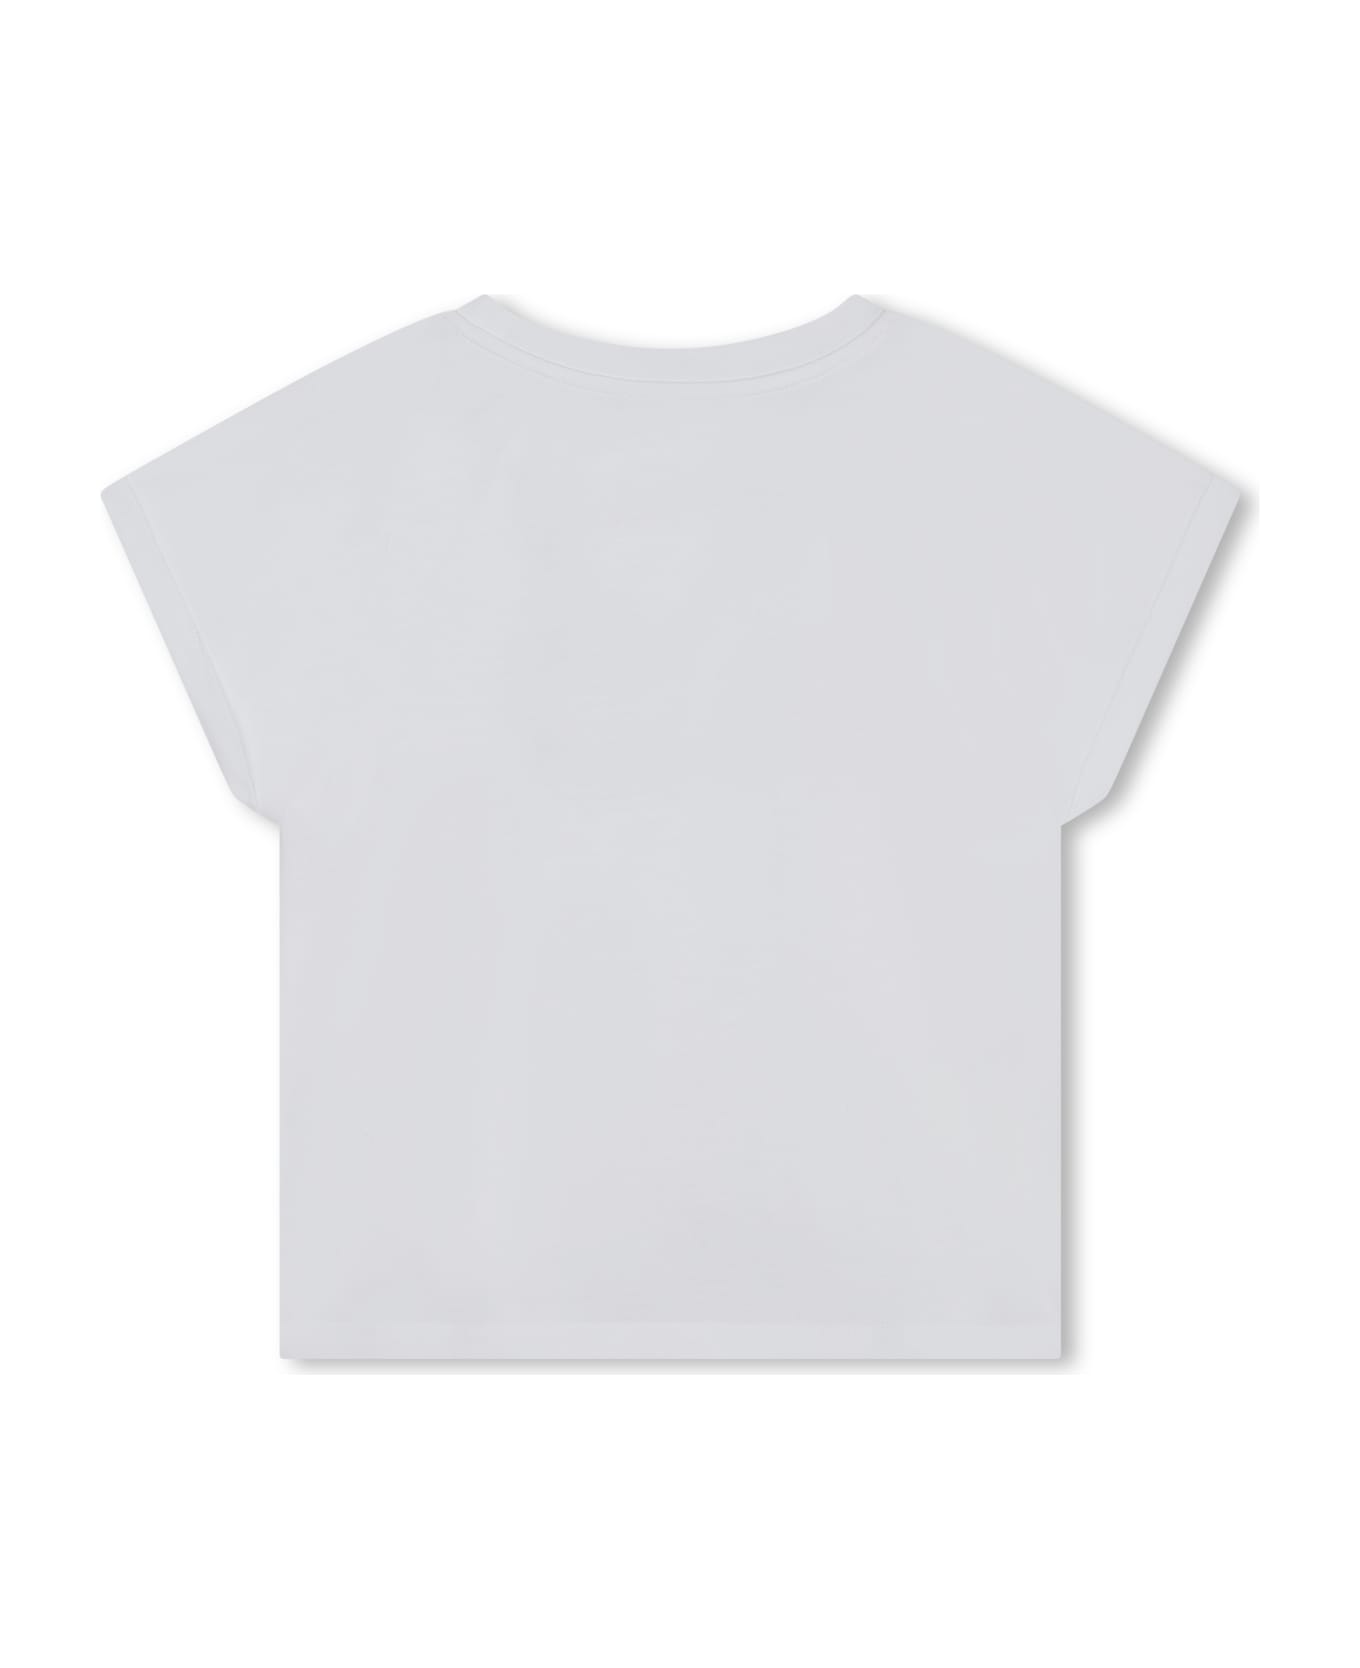 DKNY T-shirt With Print - White